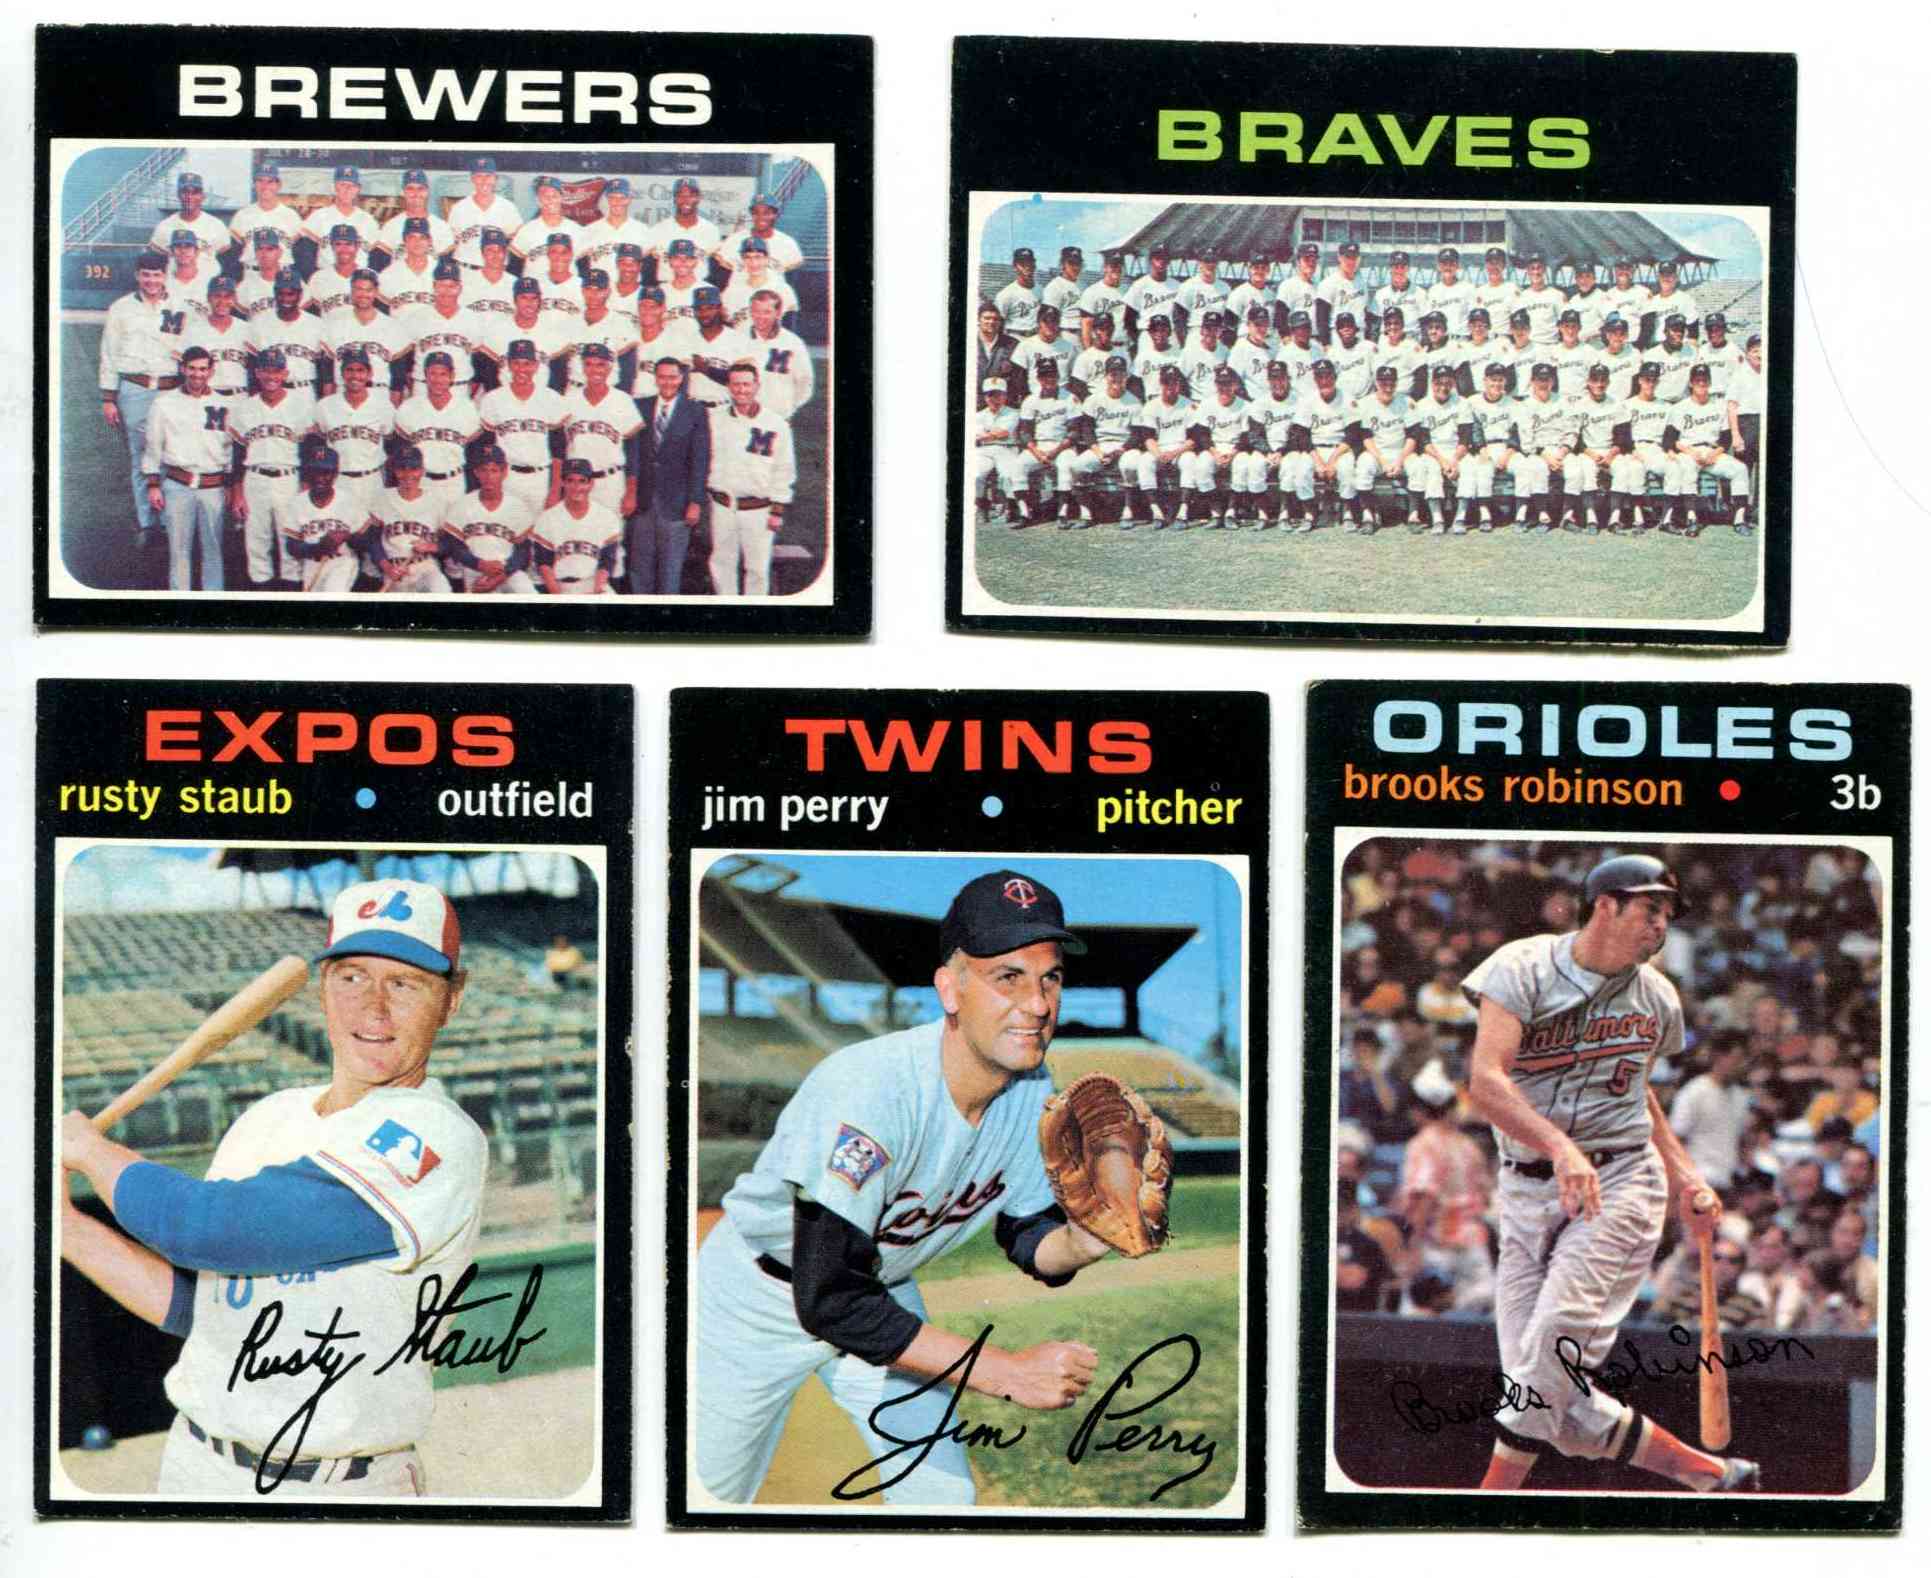 1971 Topps Baseball Cards Set checklist, prices, values & information